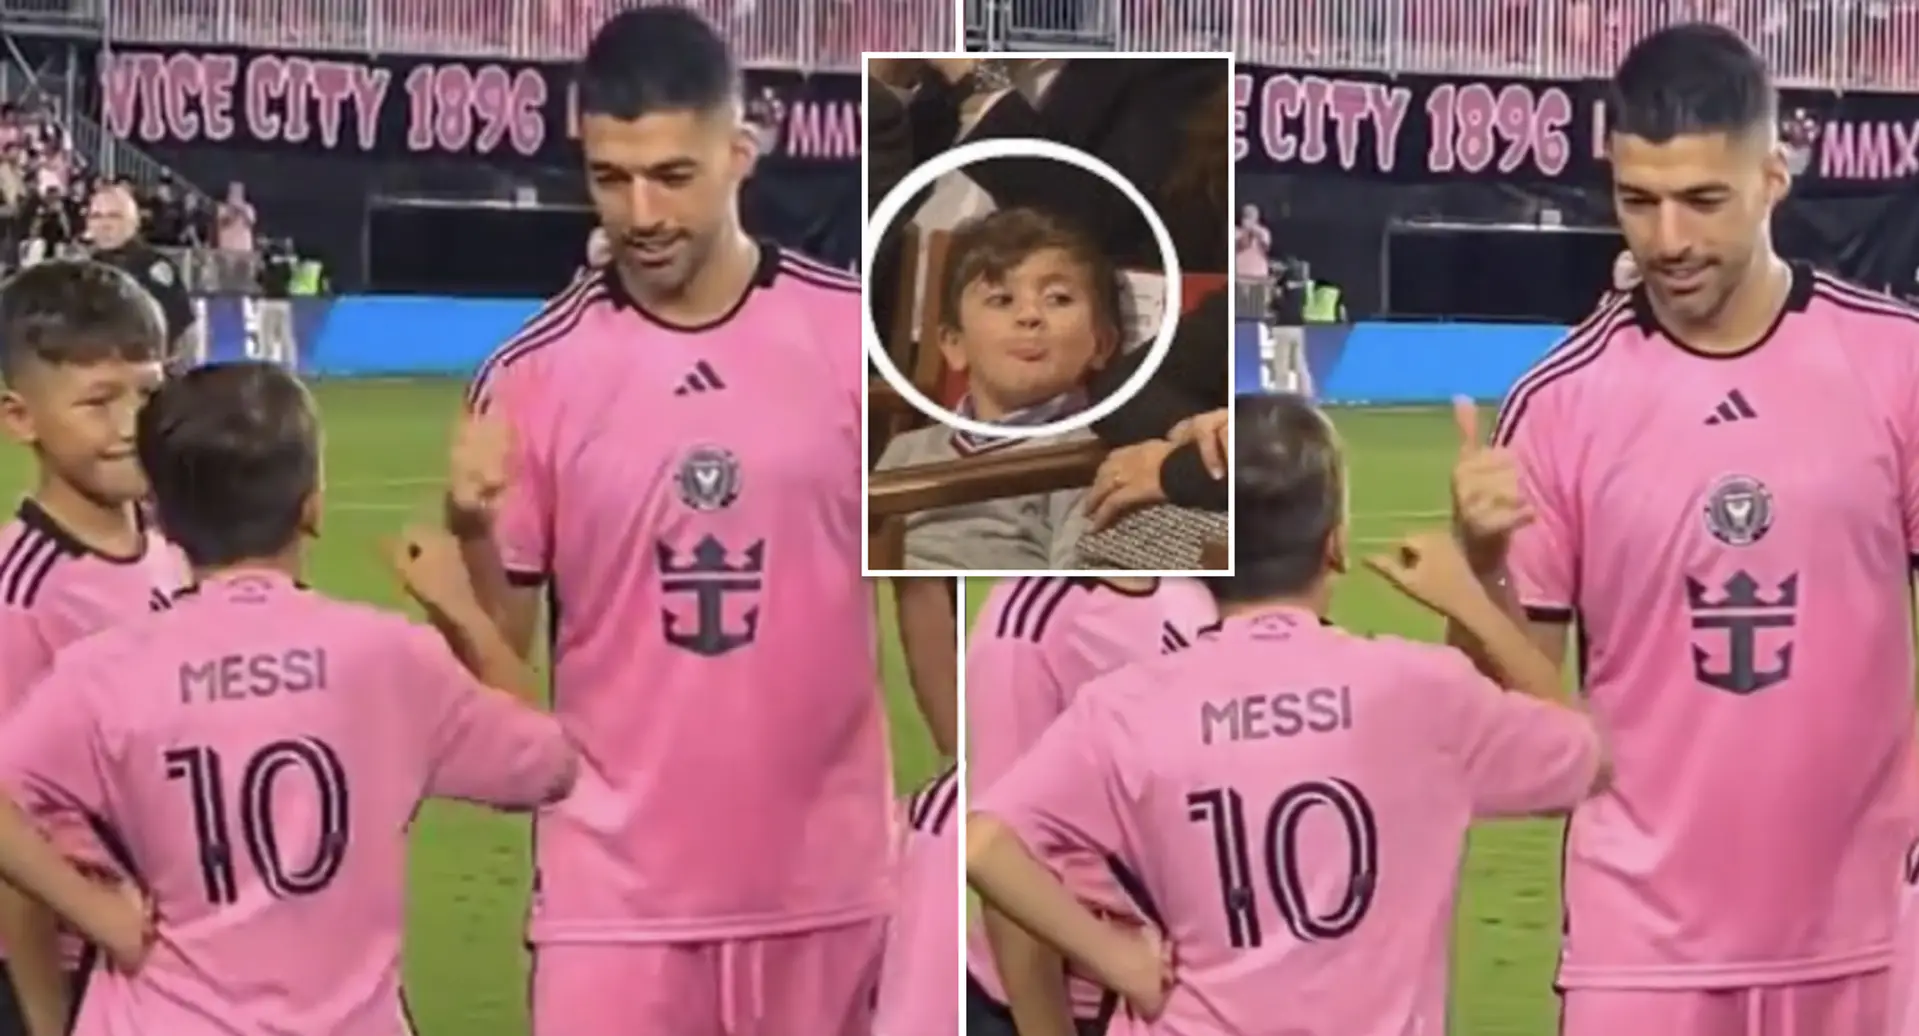 Spotted: Thiago Messi recreates iconic handshake with Luis Suarez 7 years later